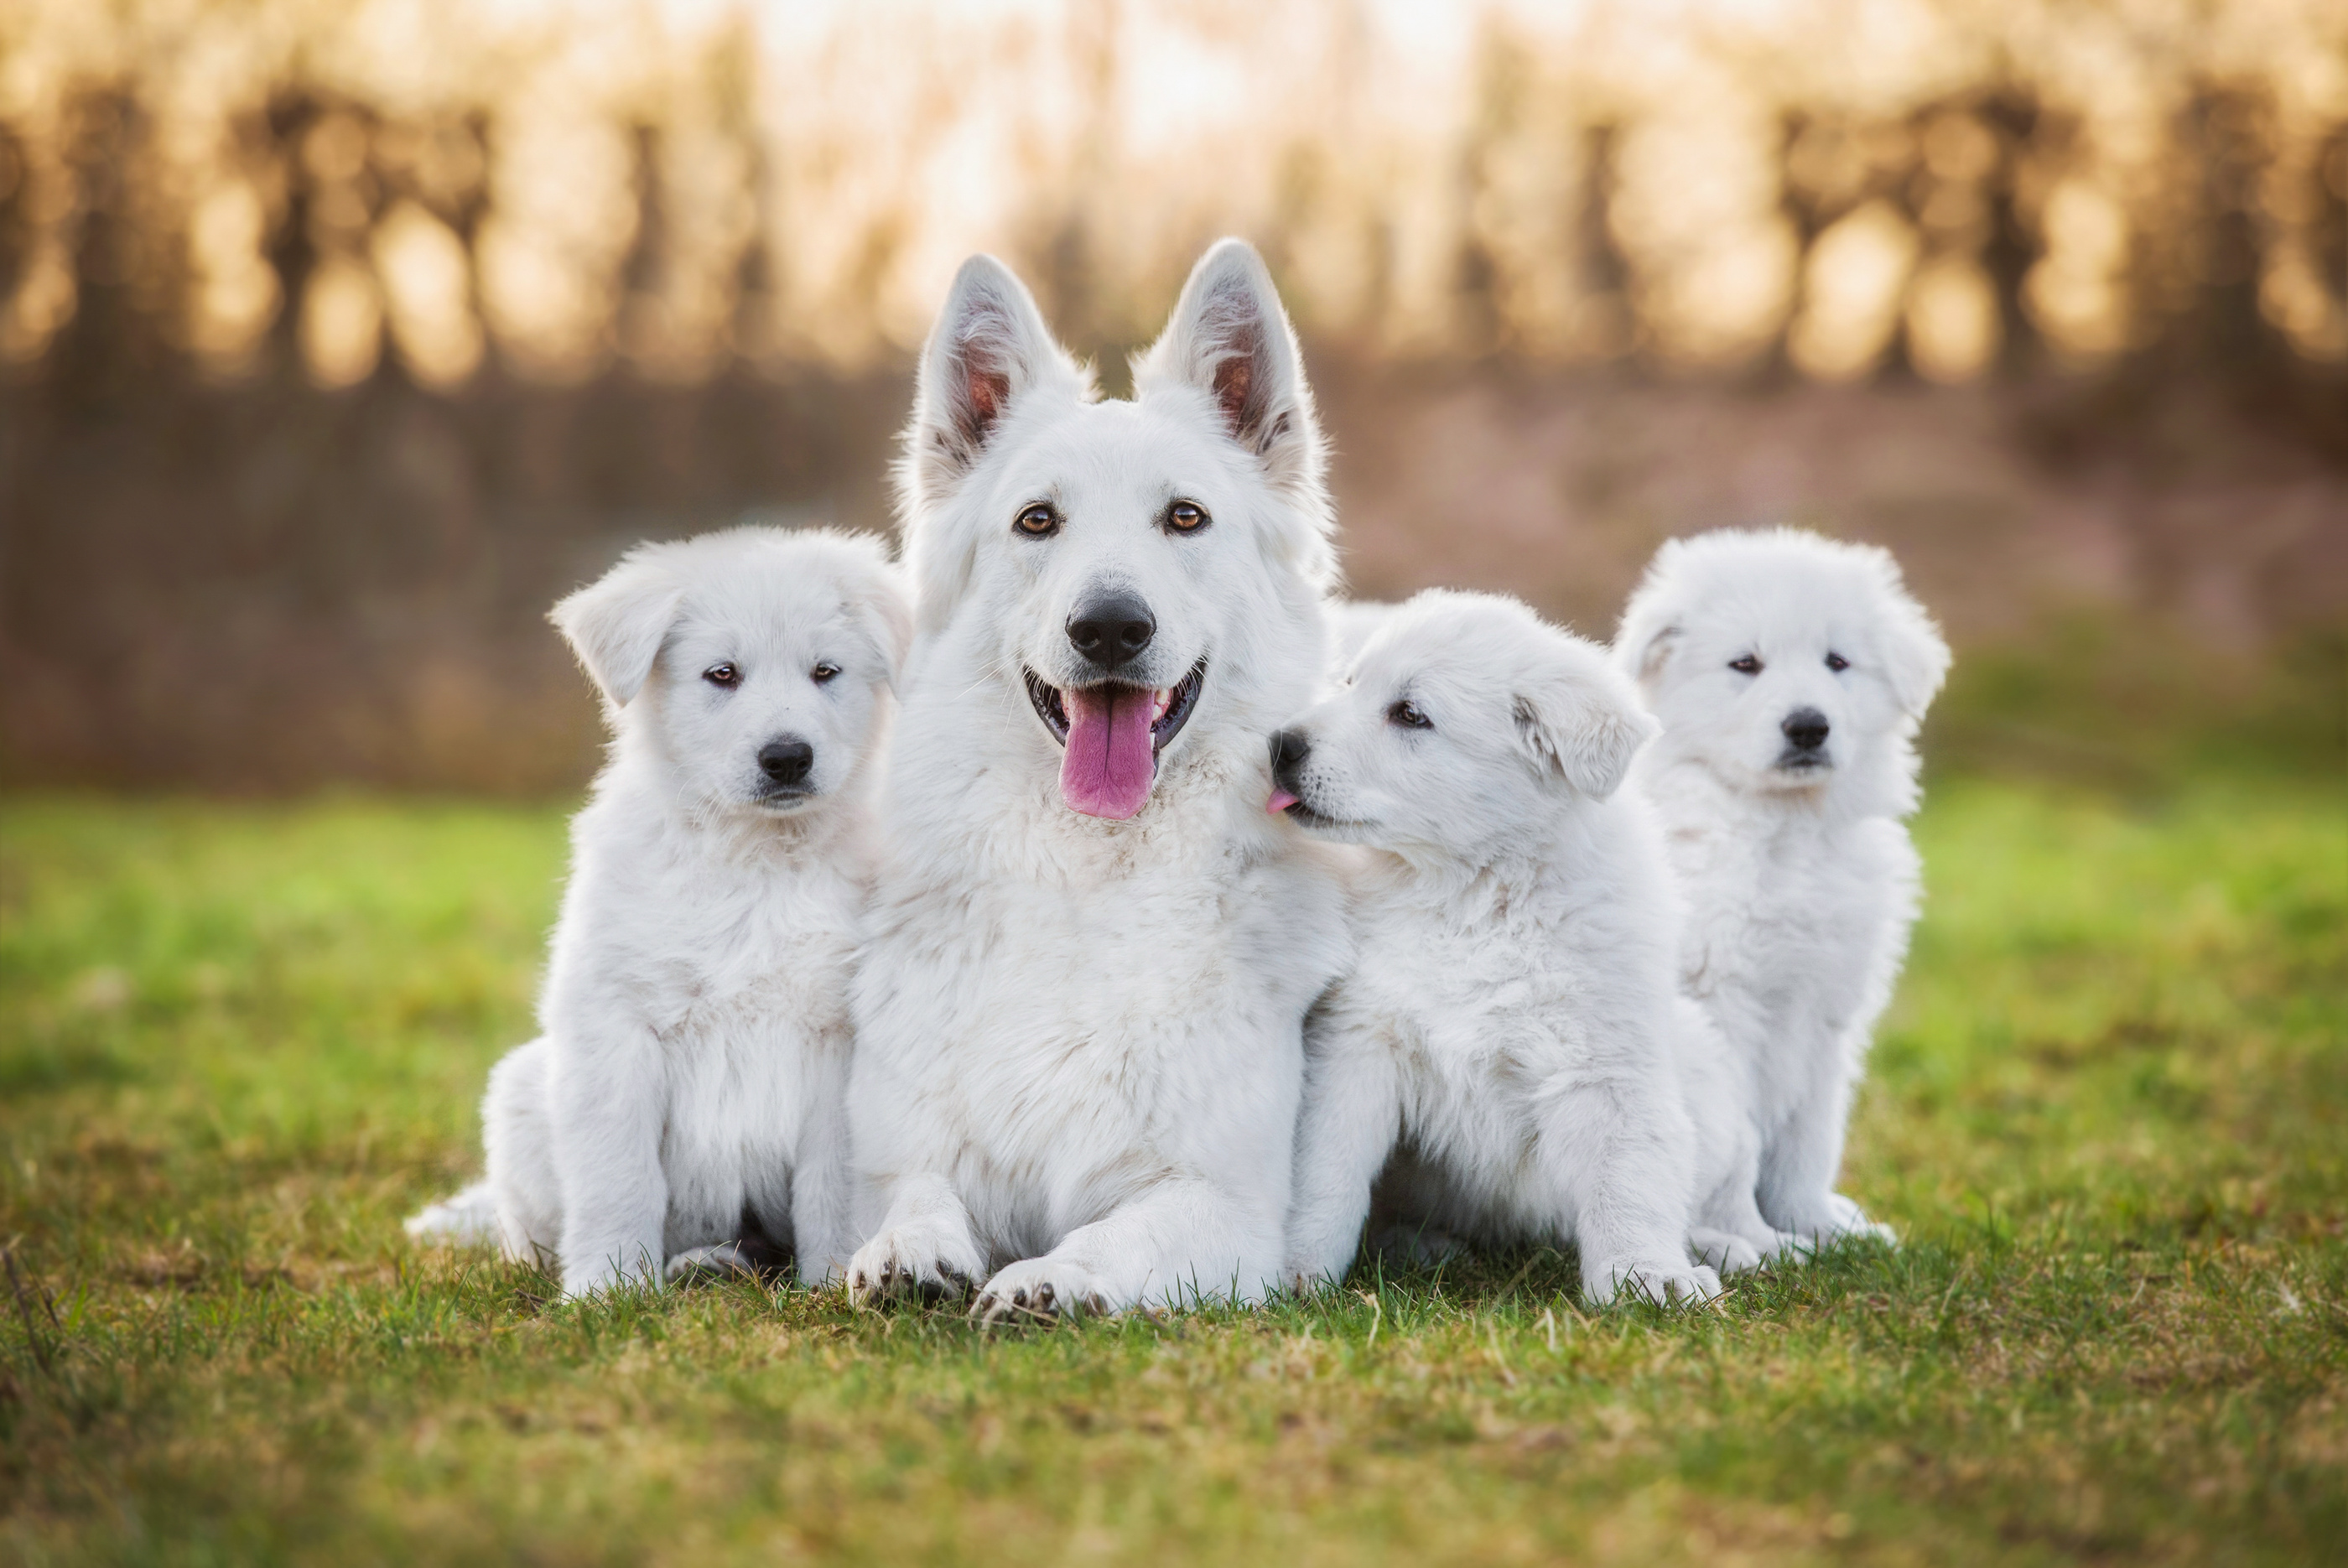 Sheepdog with puppies